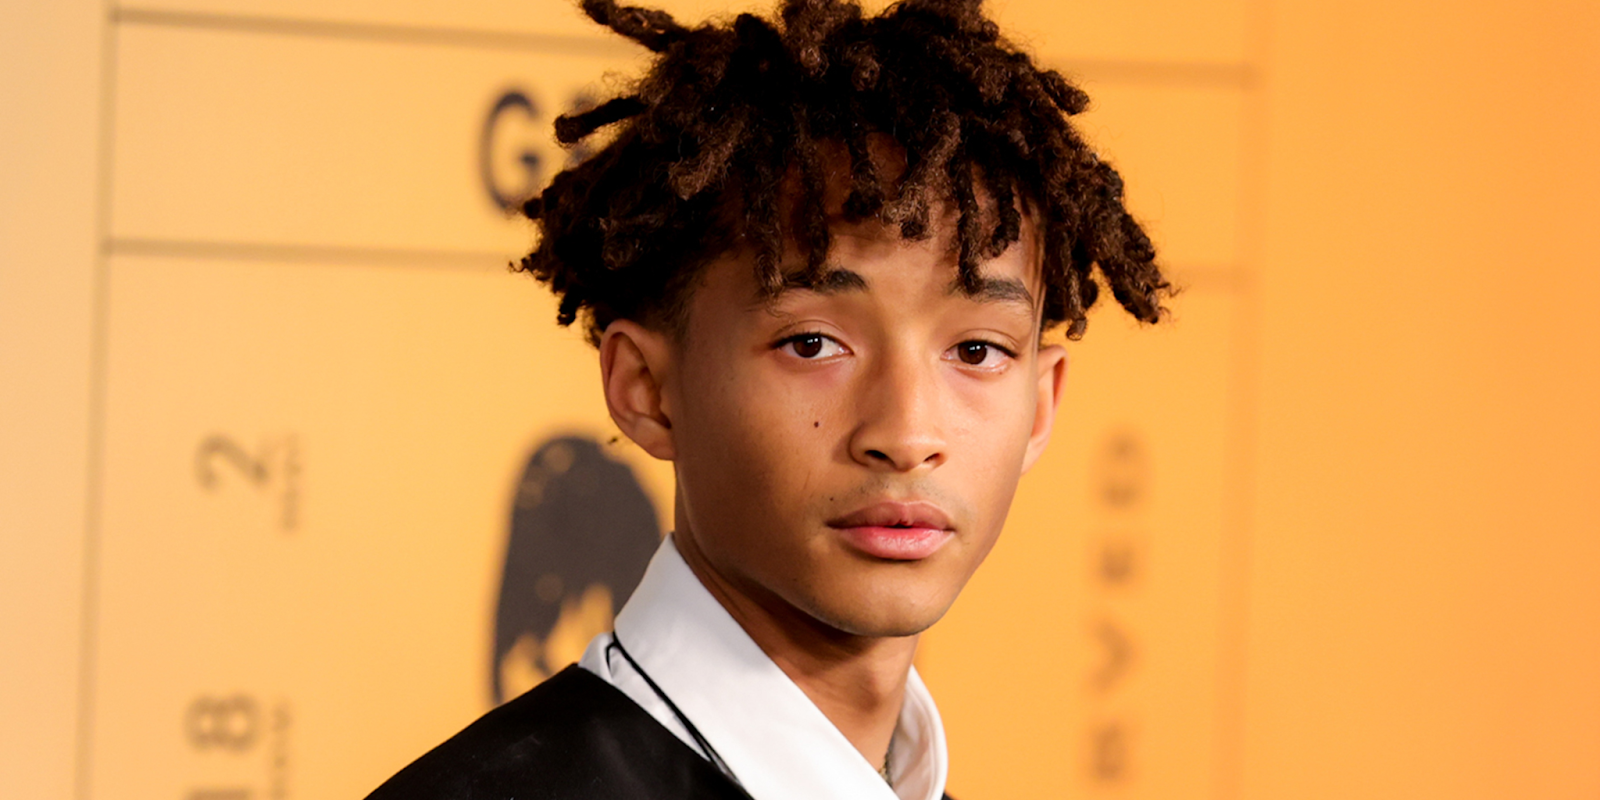 Jaden Smith - #2 in Youngest millionaires in  the world